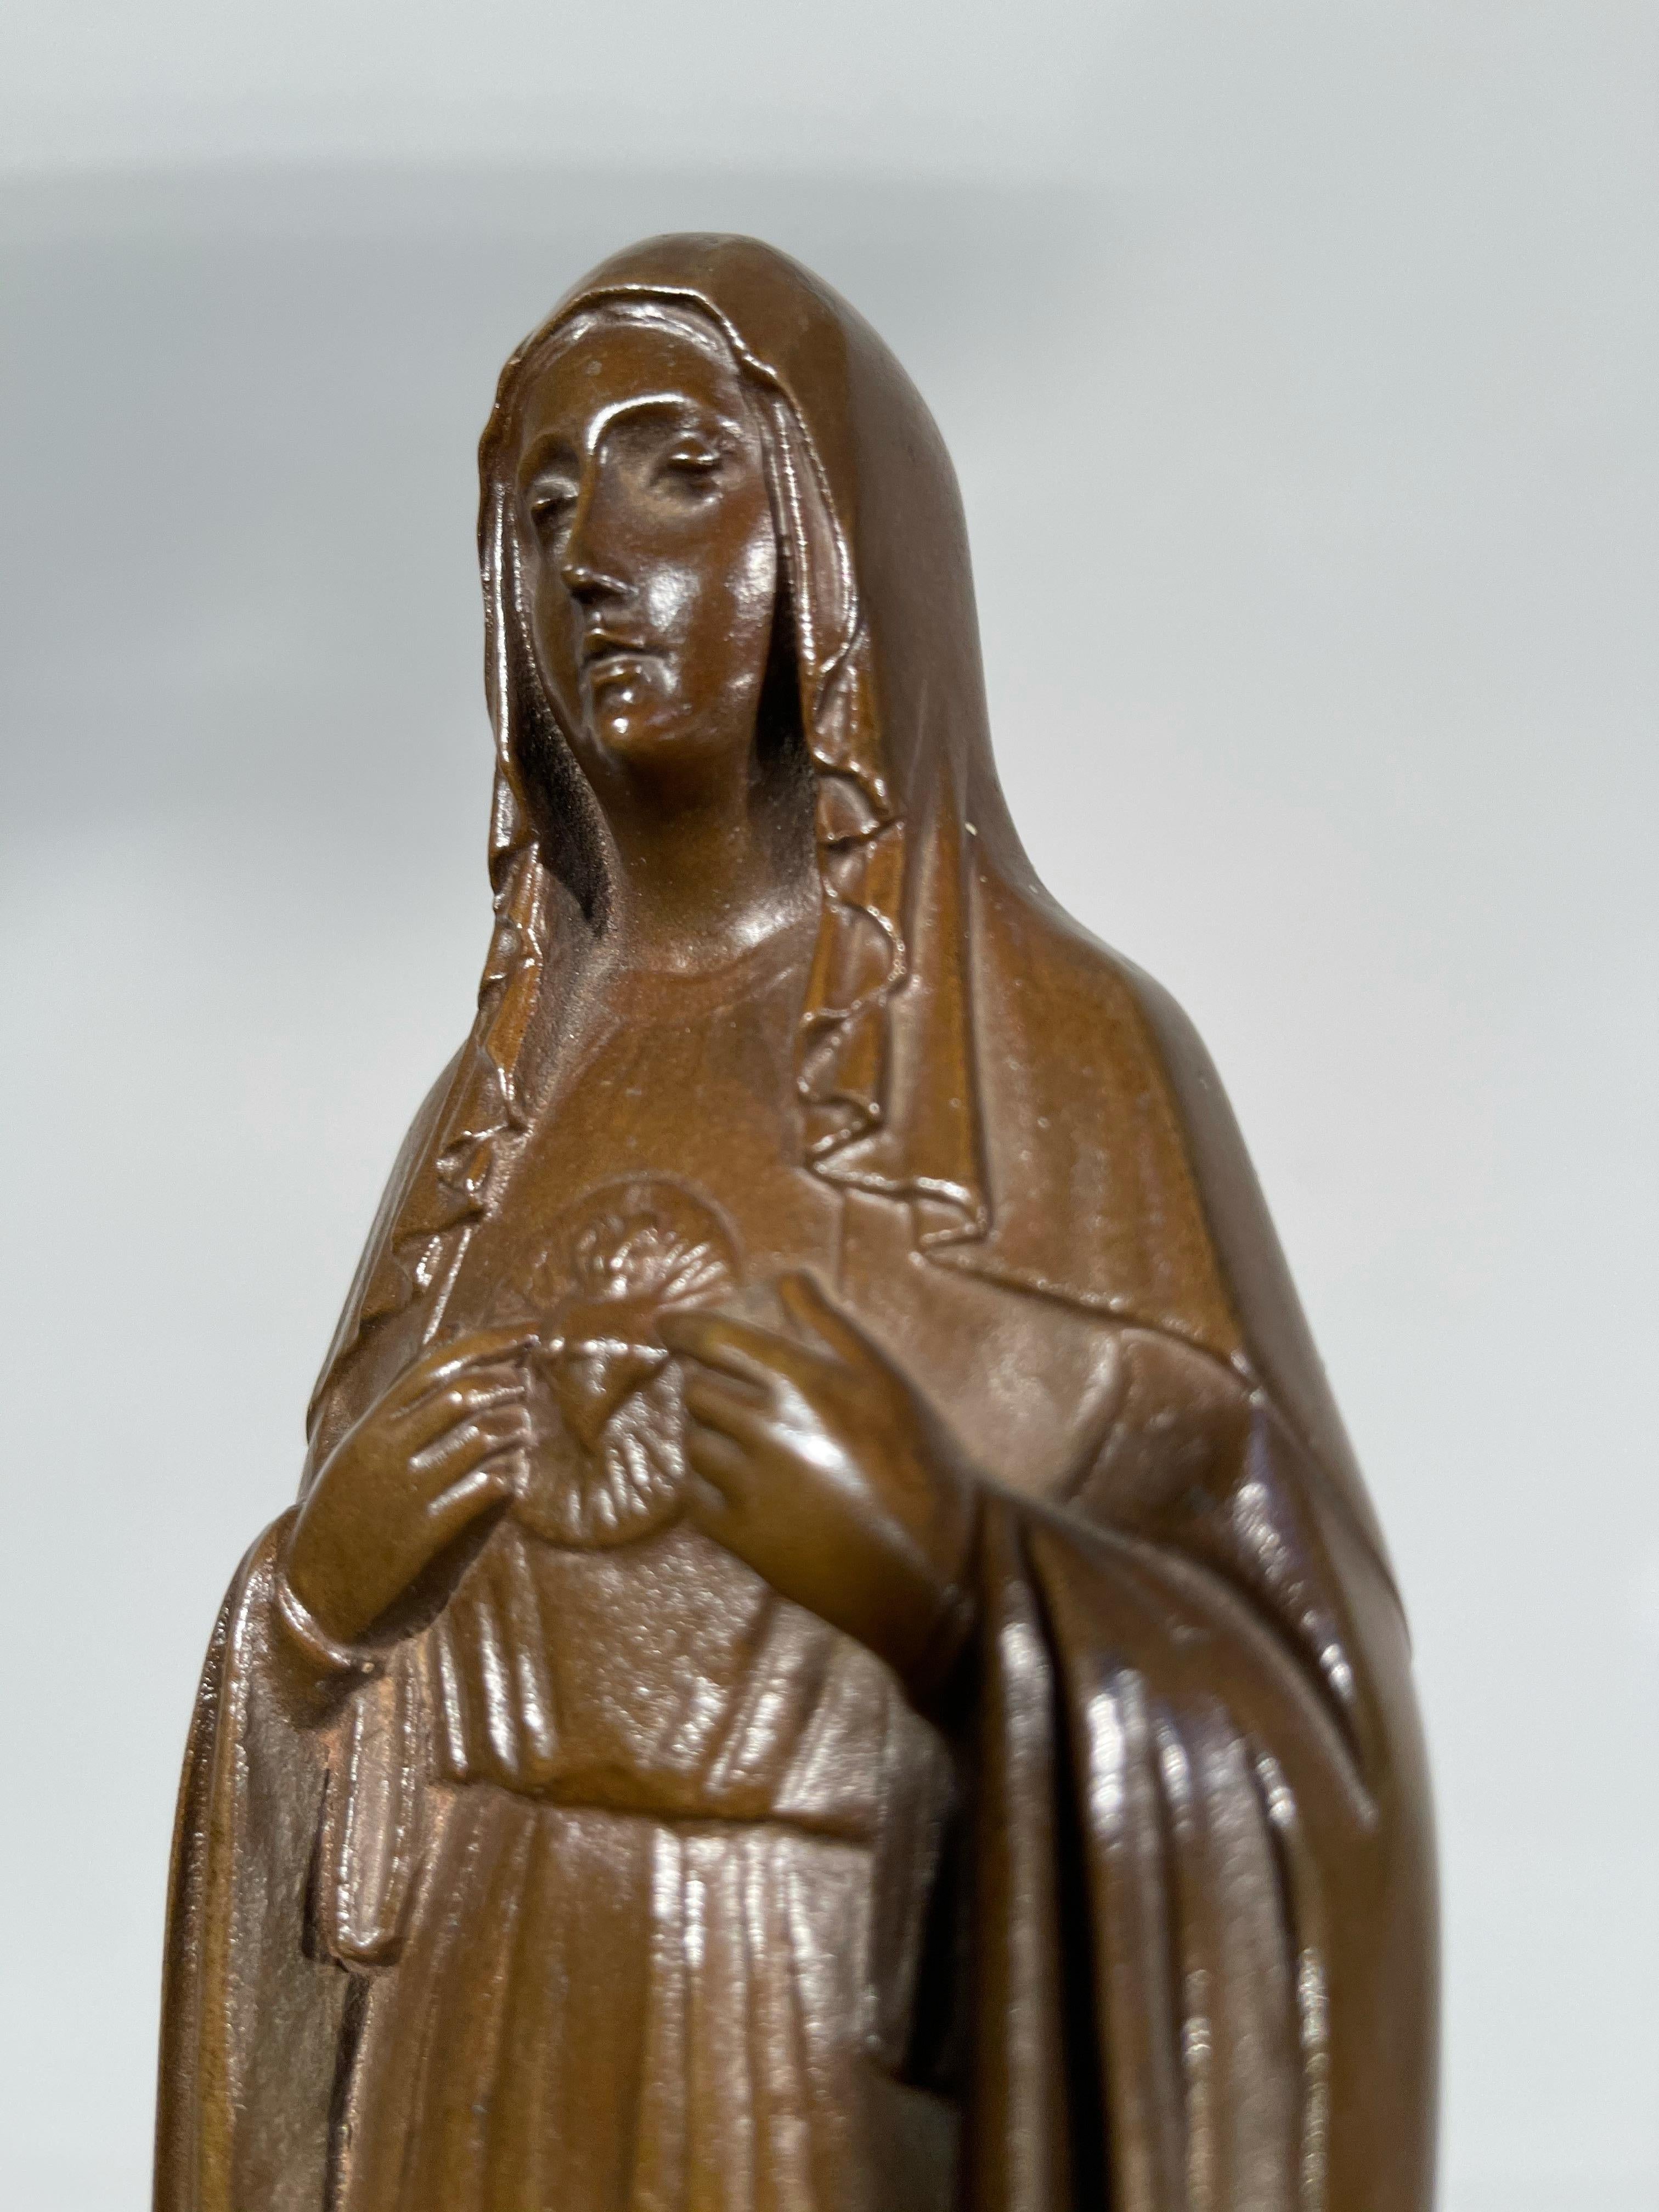 Gothic Revival Rare Patinated Antique Bronze Sculpture of the Immaculate Heart of Virgin Mary For Sale